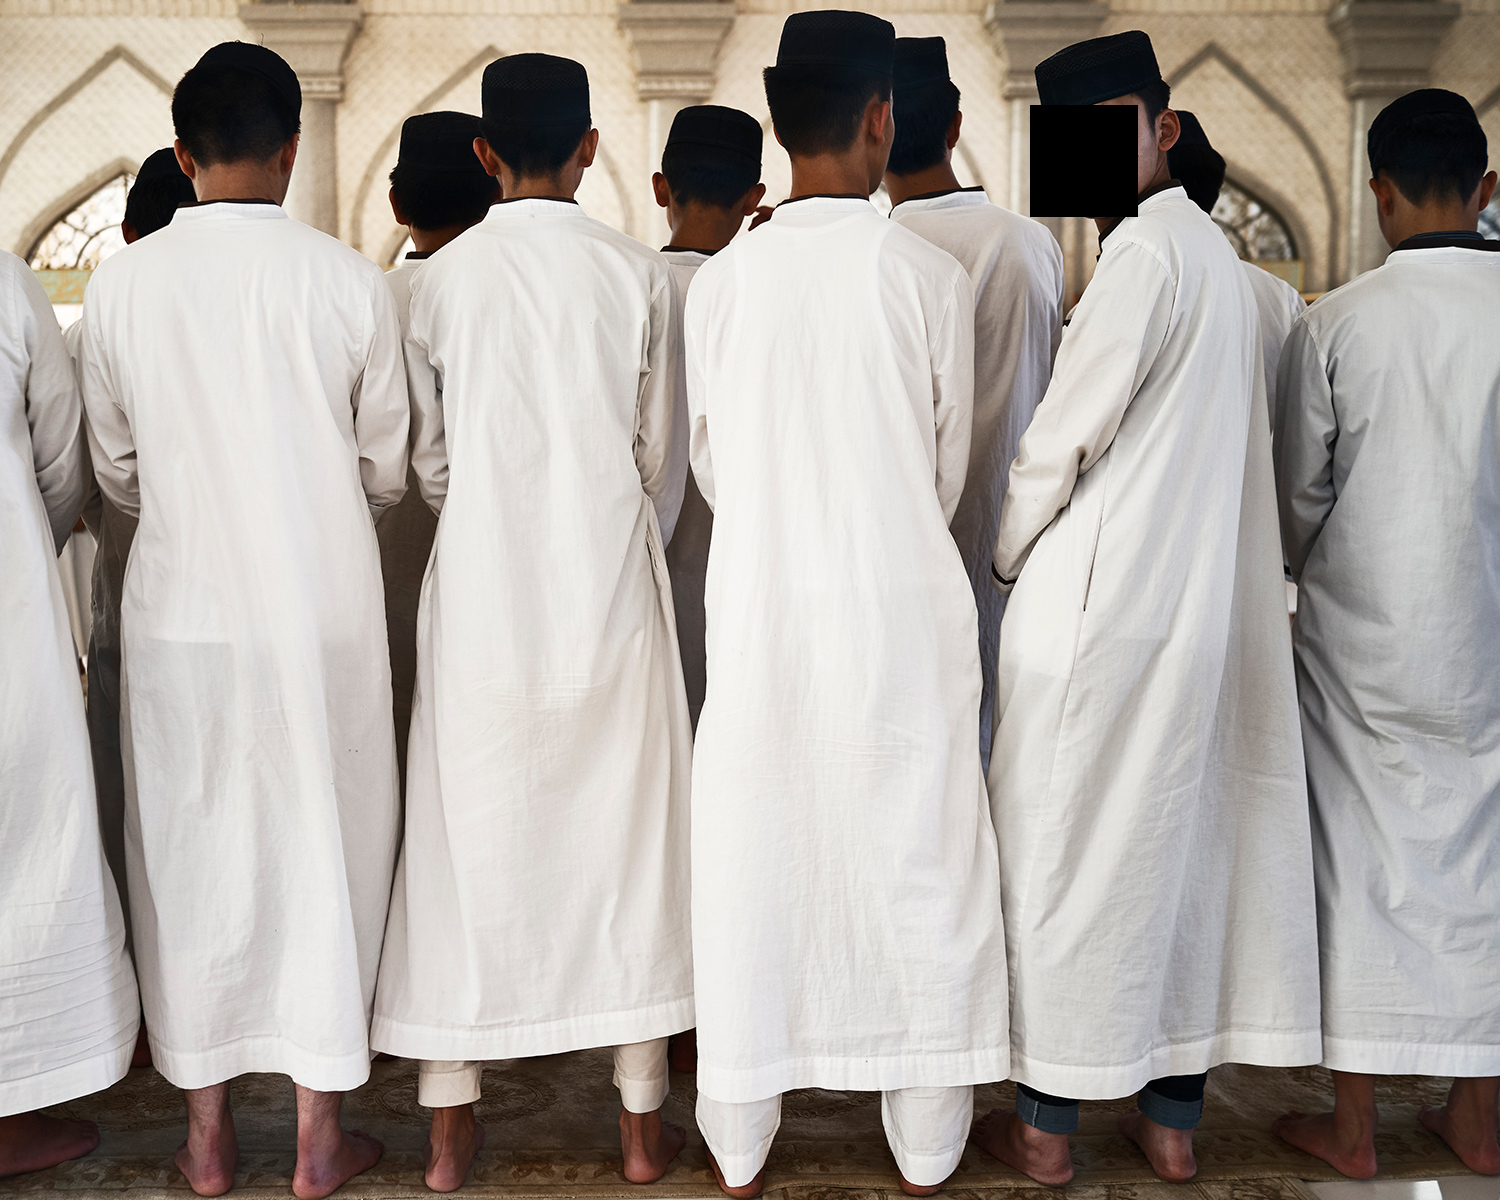 Students prepare for prayer at an Arabic school affiliated with the Grand Mosque of Shadian, June 2016. According to Umar, major mosques in China usually have Arabic-language schools, but the government has shut down more and more of them in recent years.